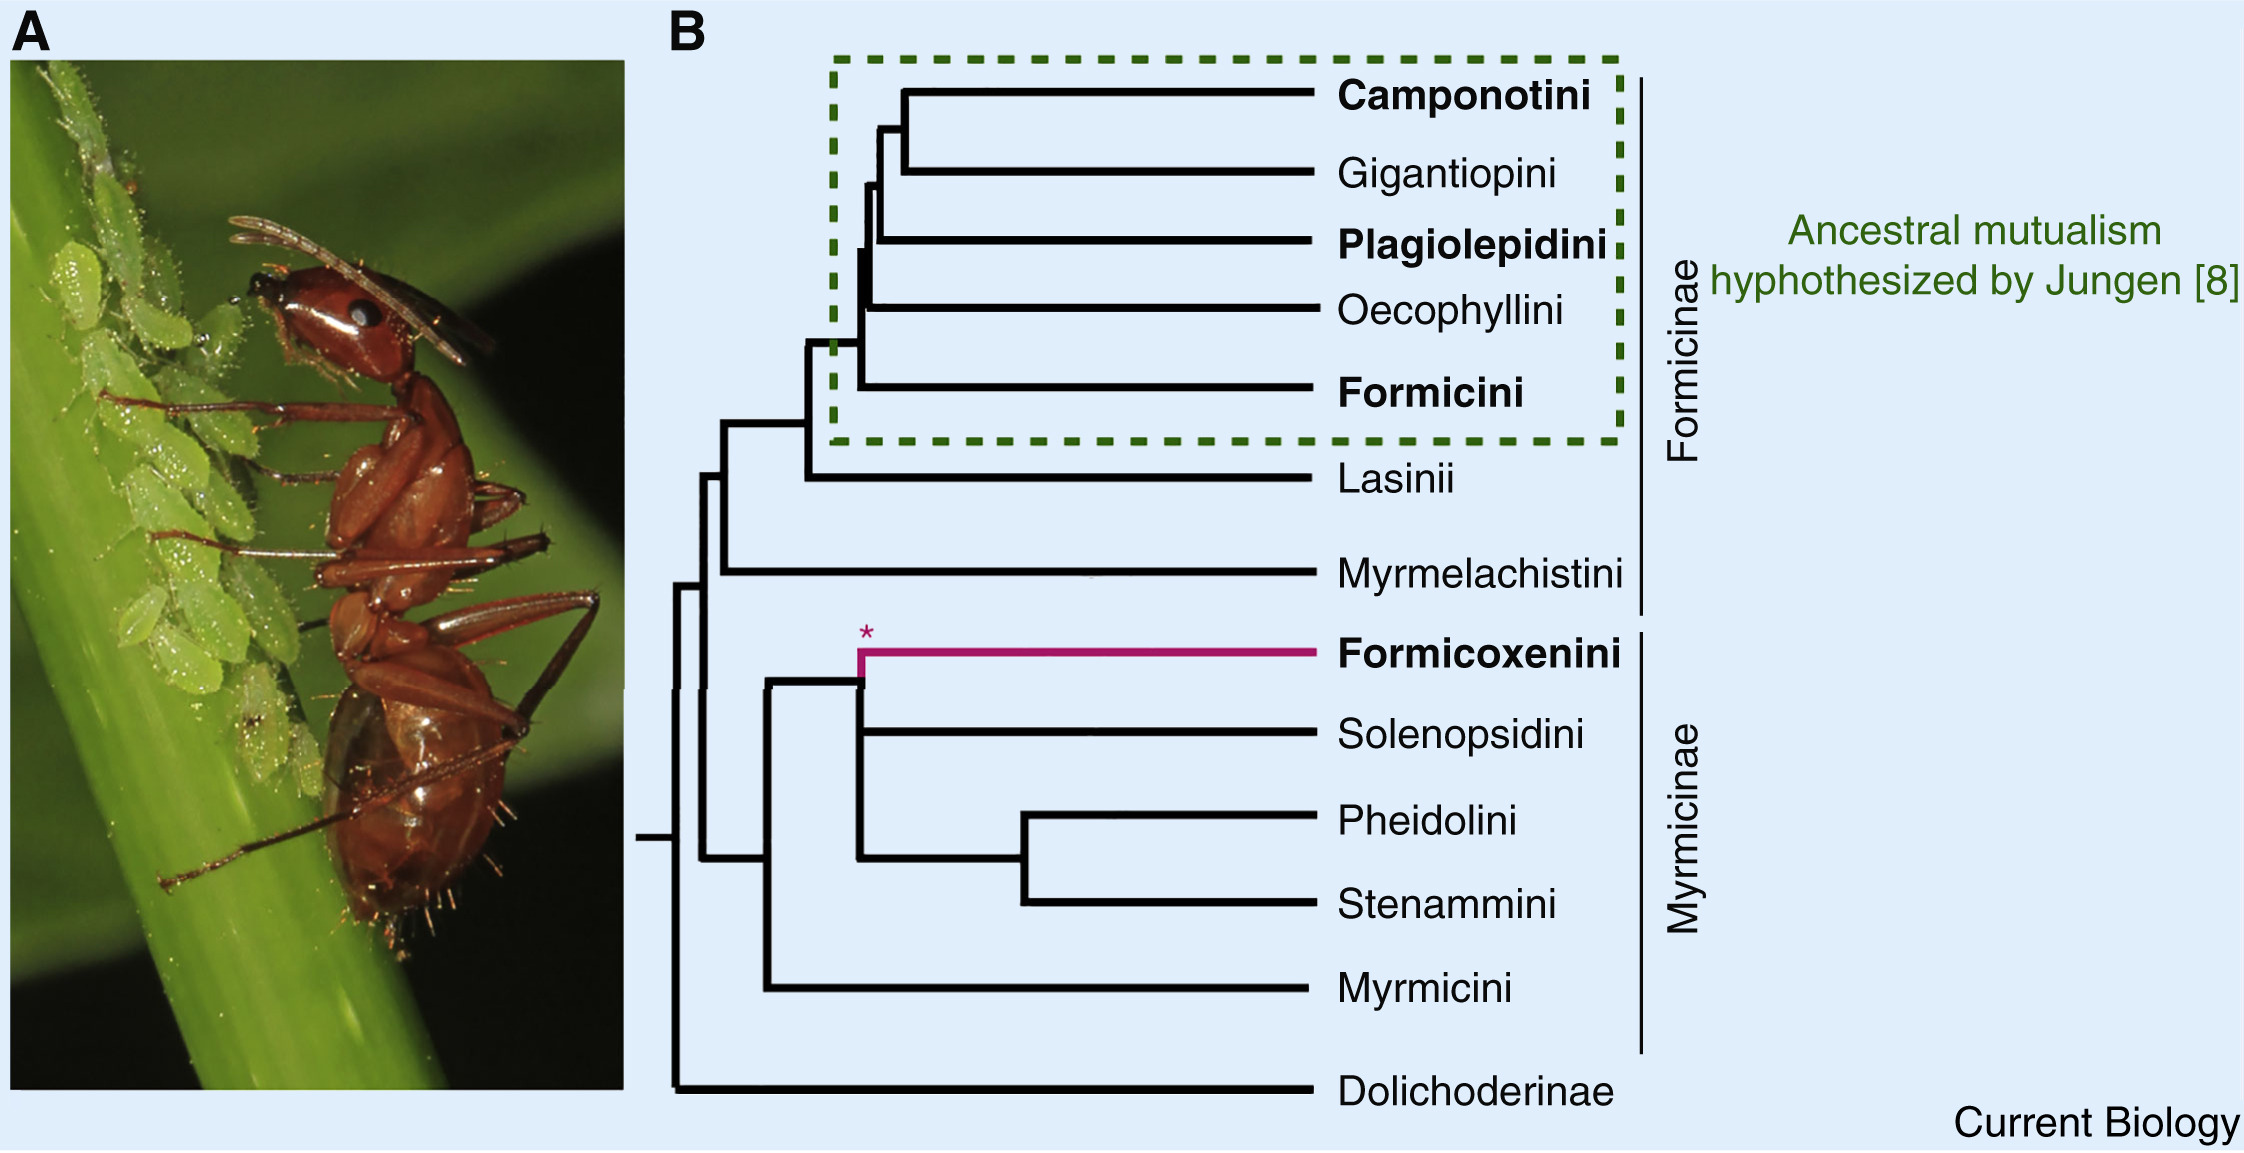 Endosymbiont mutualisms in ants